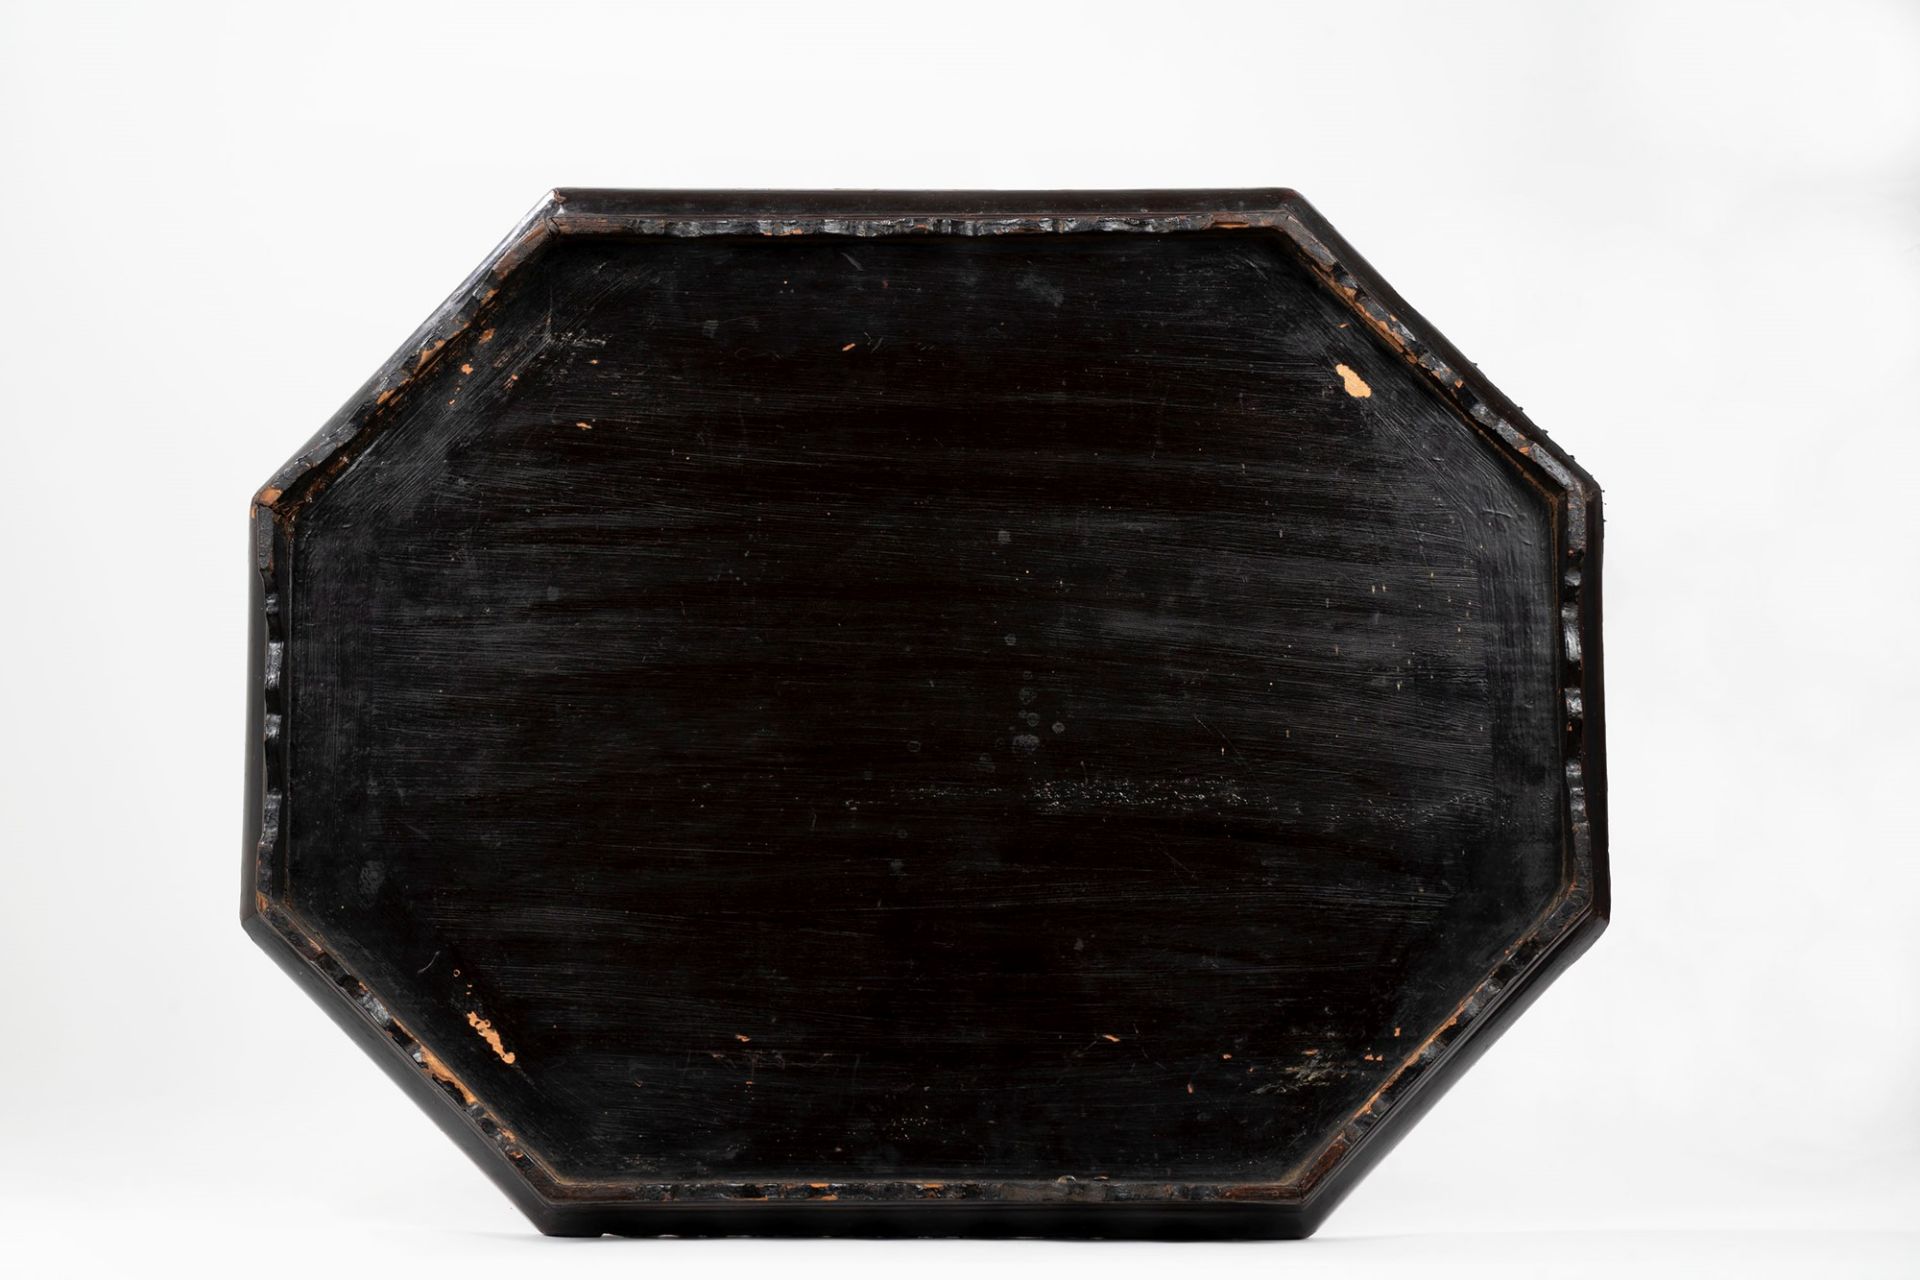 Octagonal tray in chinoiserie lacquered wood, 19th century - Image 2 of 2